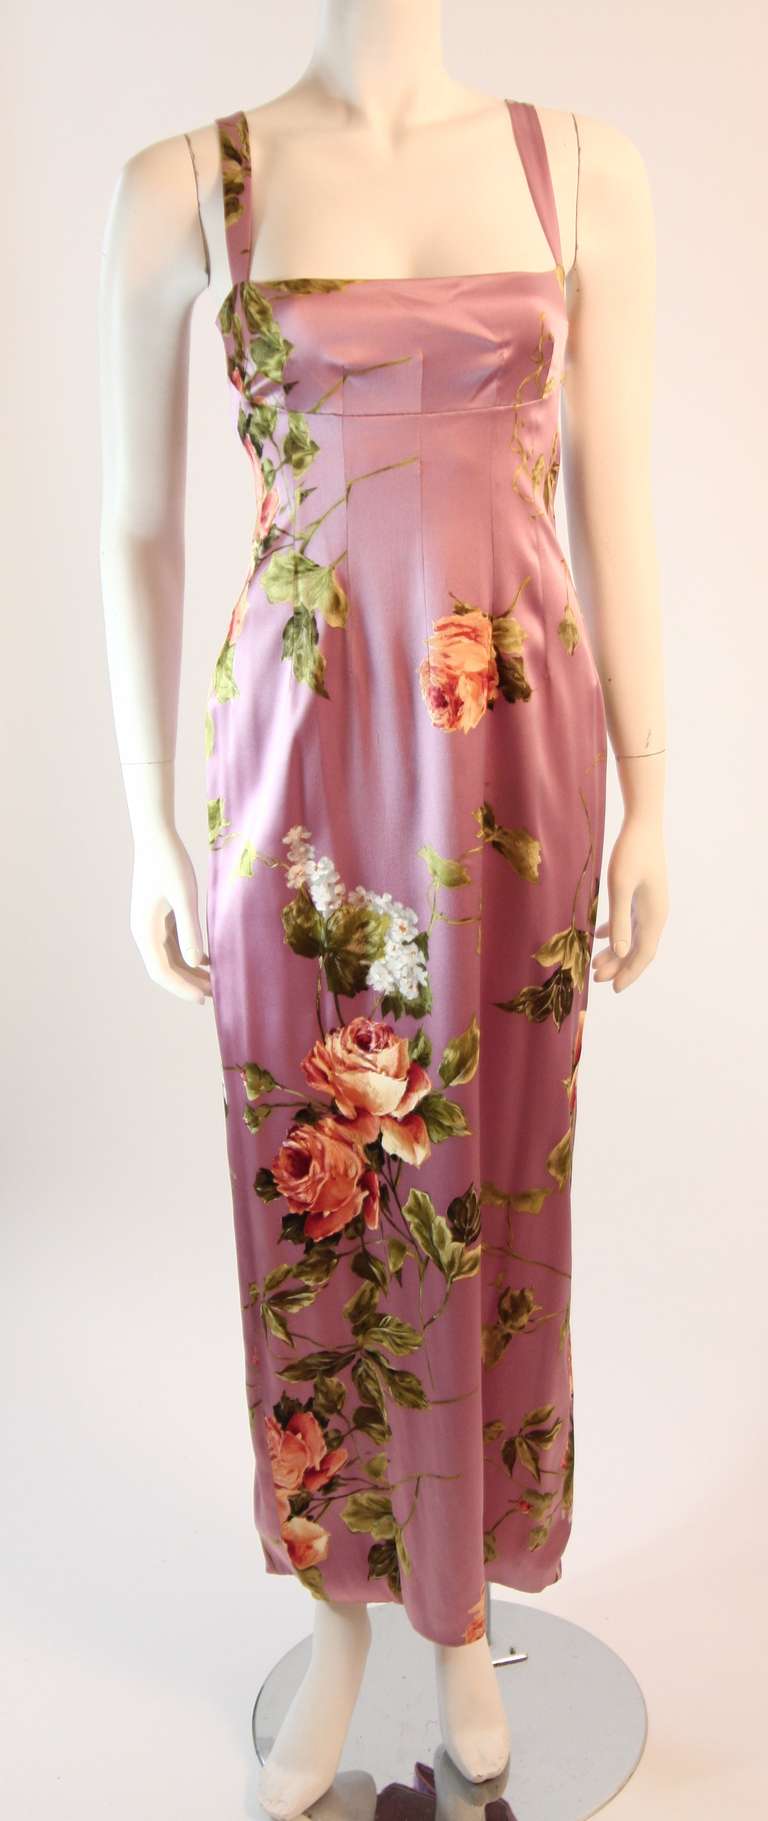 This is a stunnig Dolce and Gabbana gown. The wonderful stretch silk is a fantastic lilac hue with a beautiful floral pattern. The perfect dress for Spring, Summer, or Autumn.

Measures (approximate)
Size 44
Length: 55.5